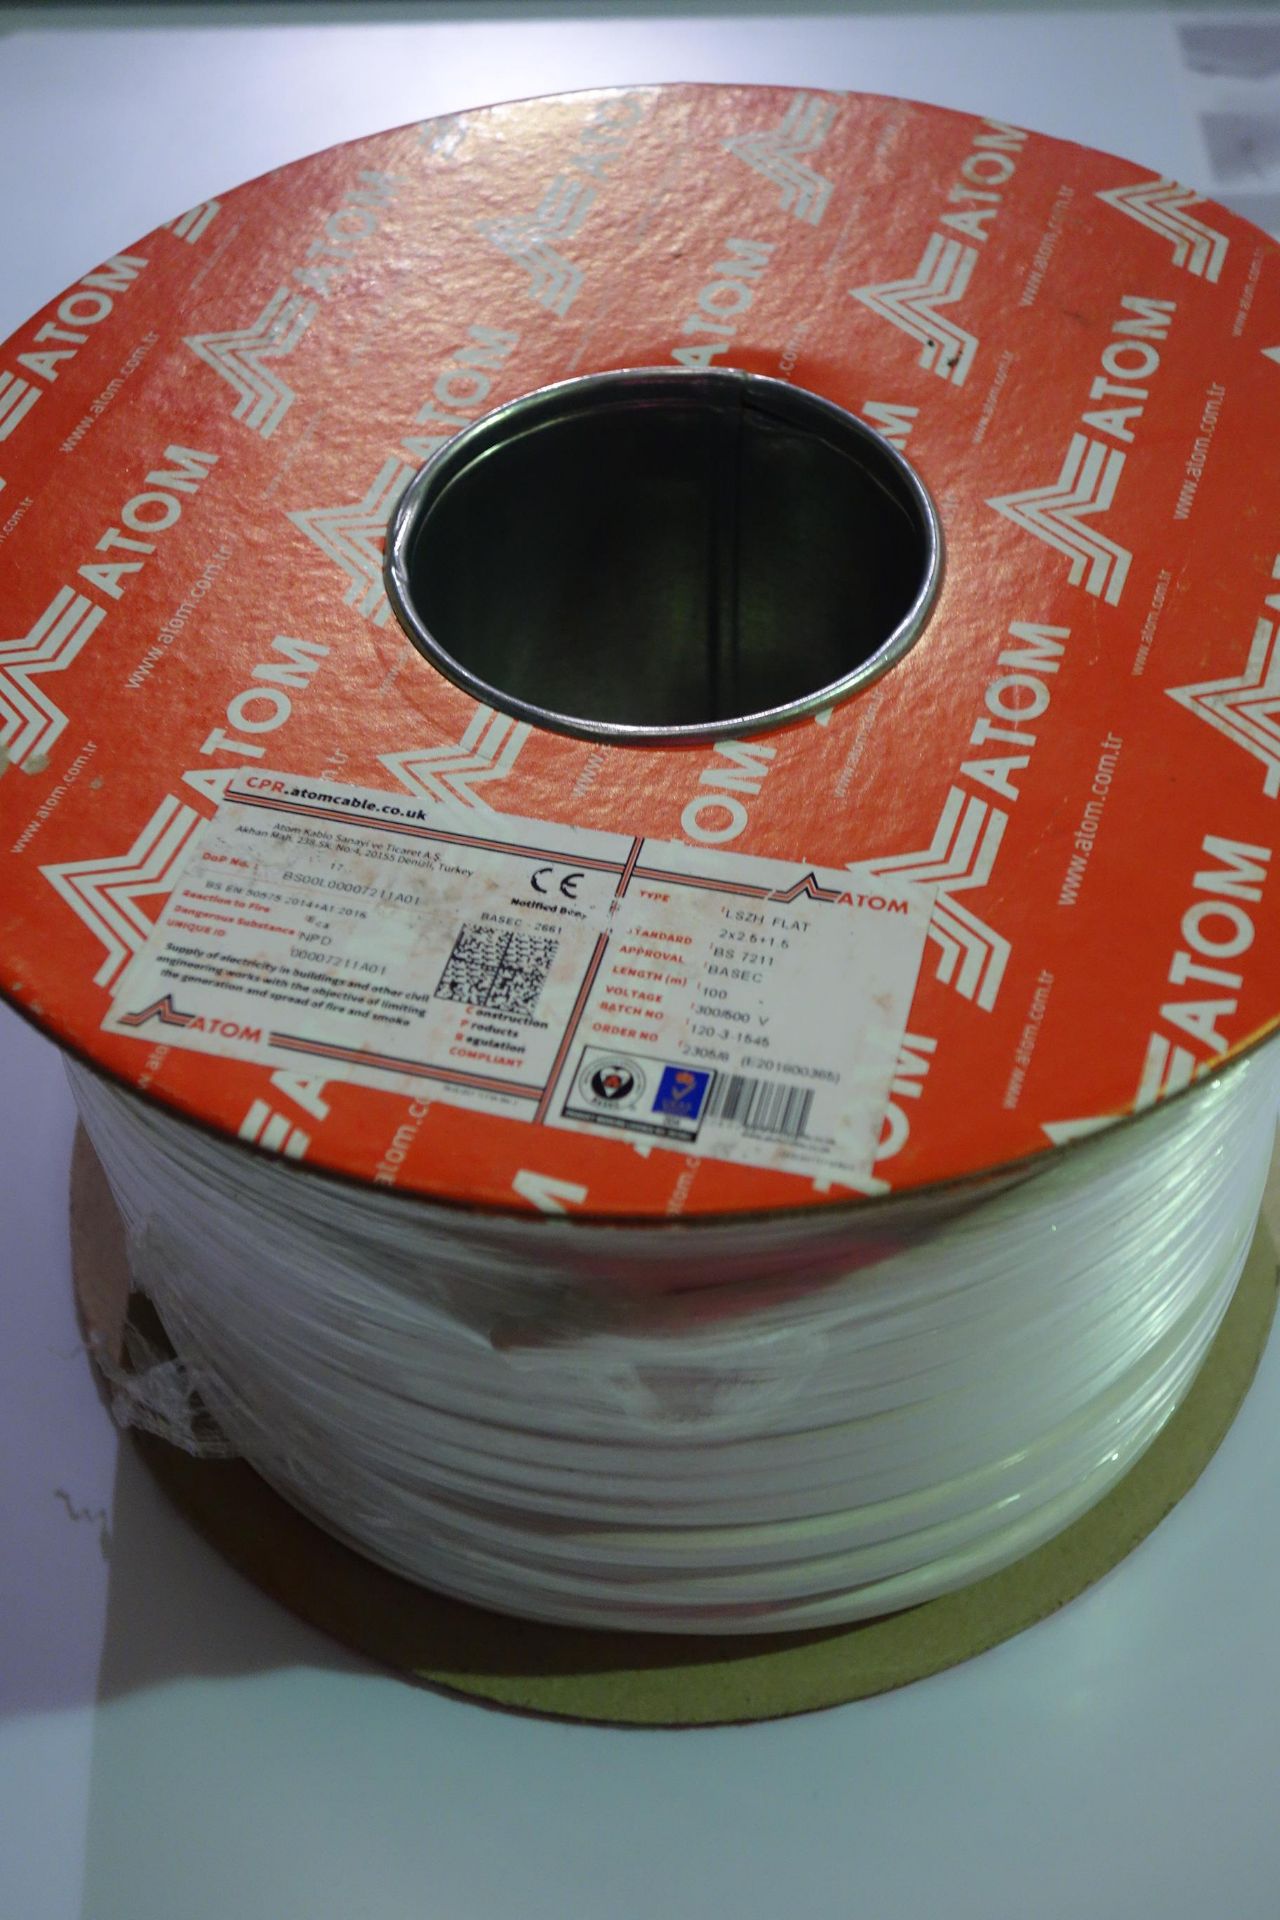 1 X Atom 50M Drum Of PVC Flat 2 x 6 + 2.5 Cable Grey 300/500V 2 Core Brown + Blue Also 1 X Atom 100M